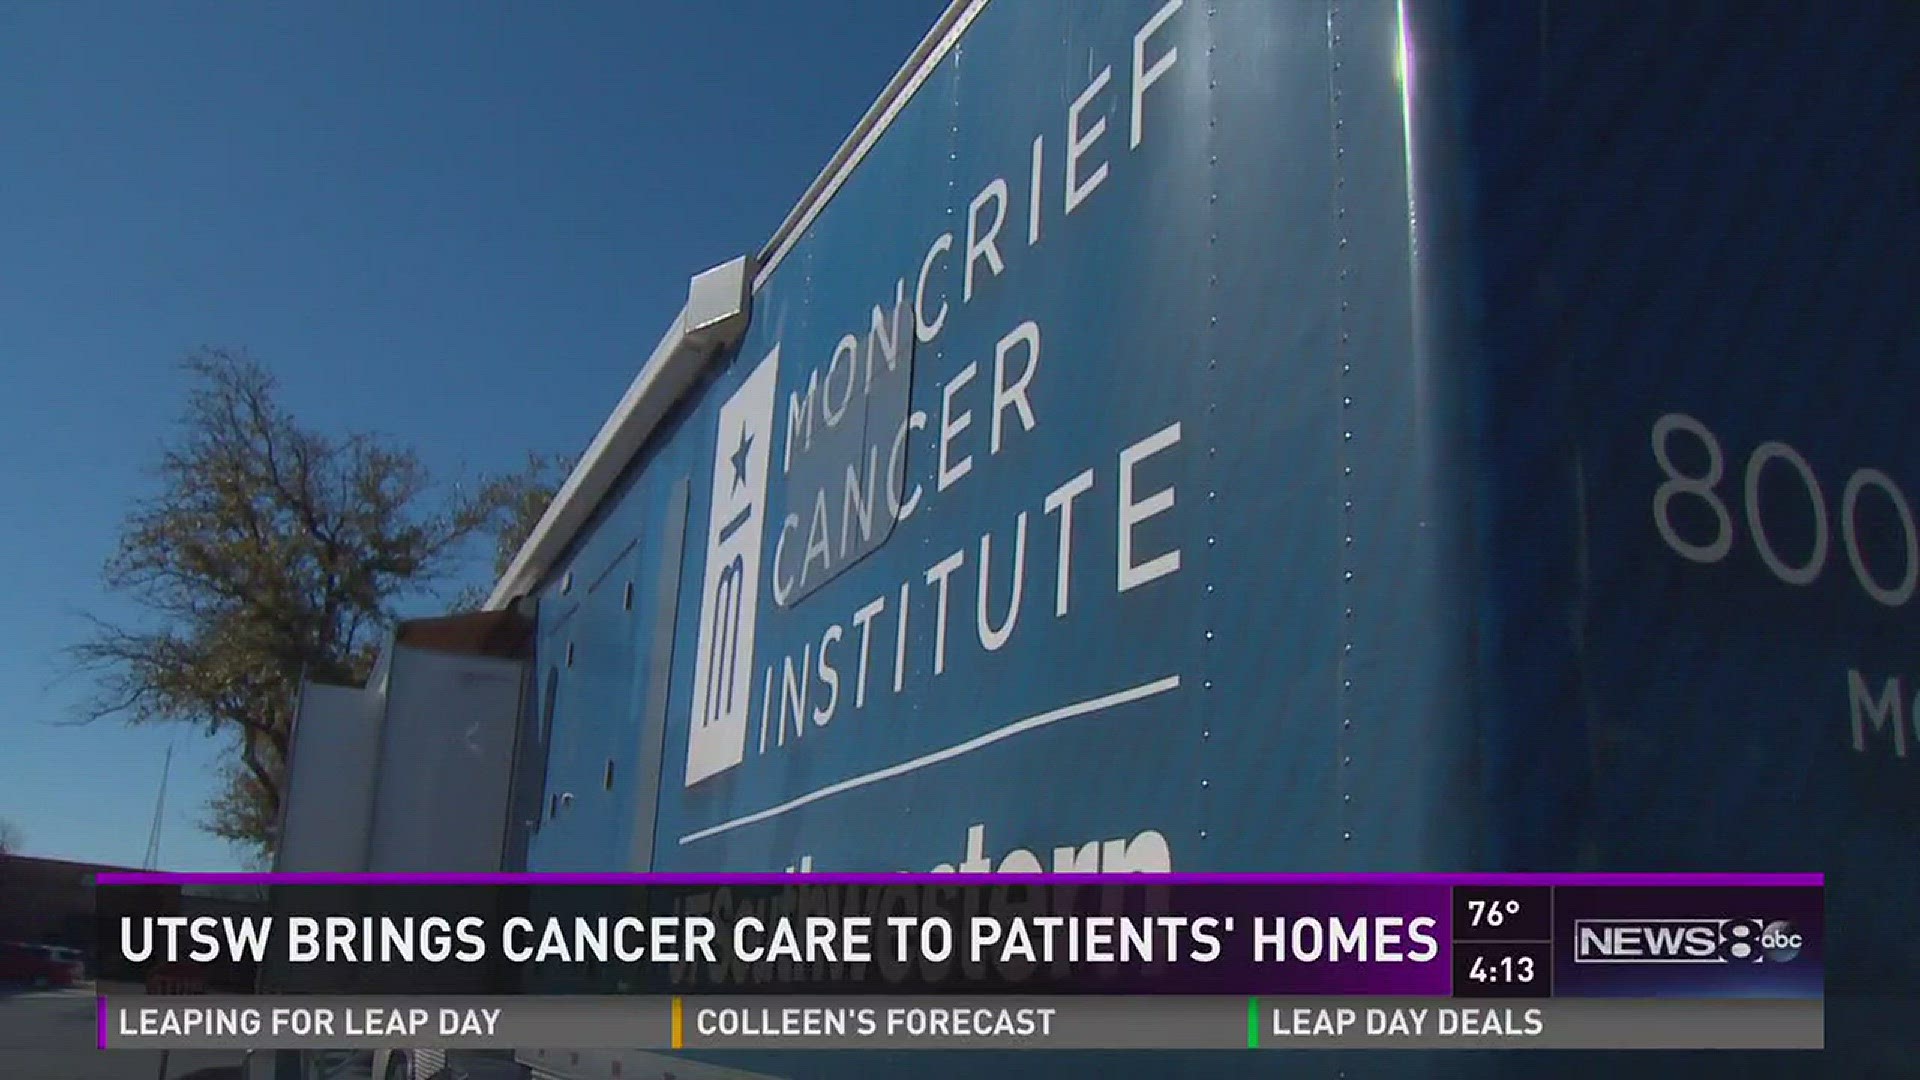 UTSW brings cancer care to patients' homes